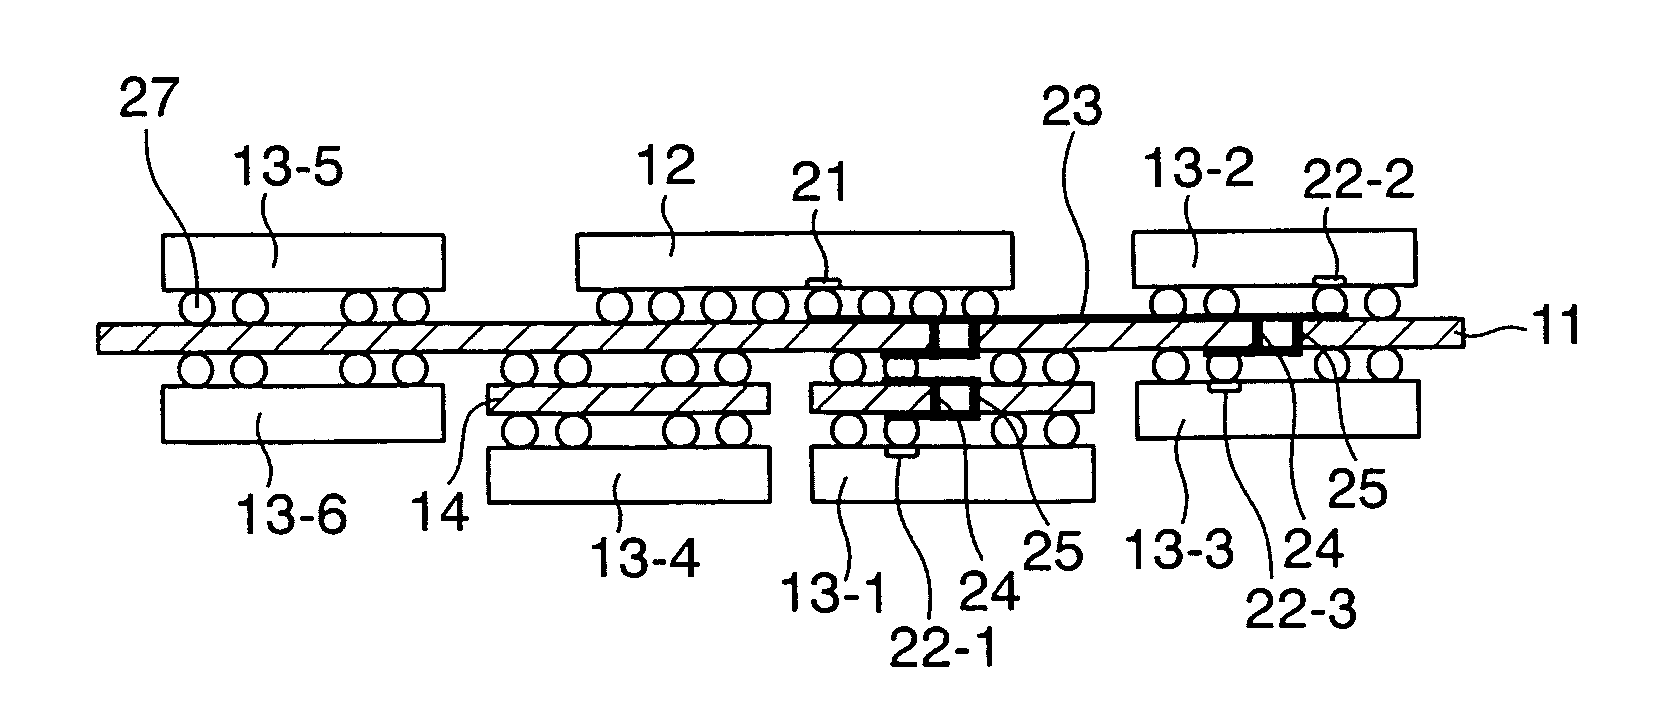 Semiconductor module including a plurality of IC chips therein